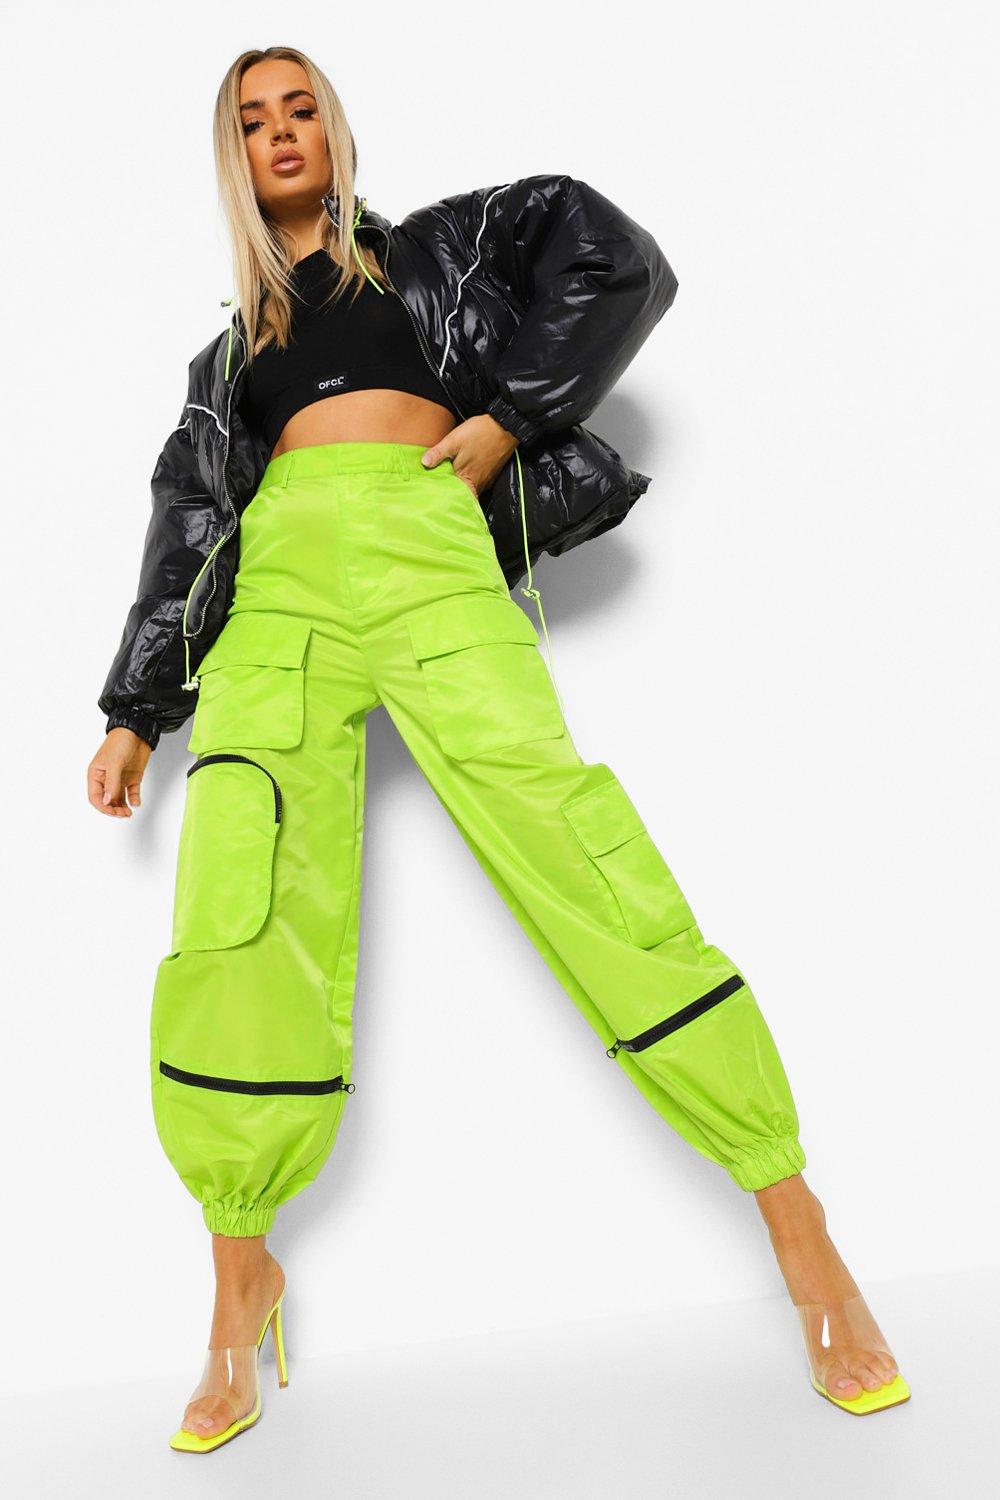 Double Crazy Neon Green Cargo Pants  Neon outfits, Green cargo pants,  Clothes for women